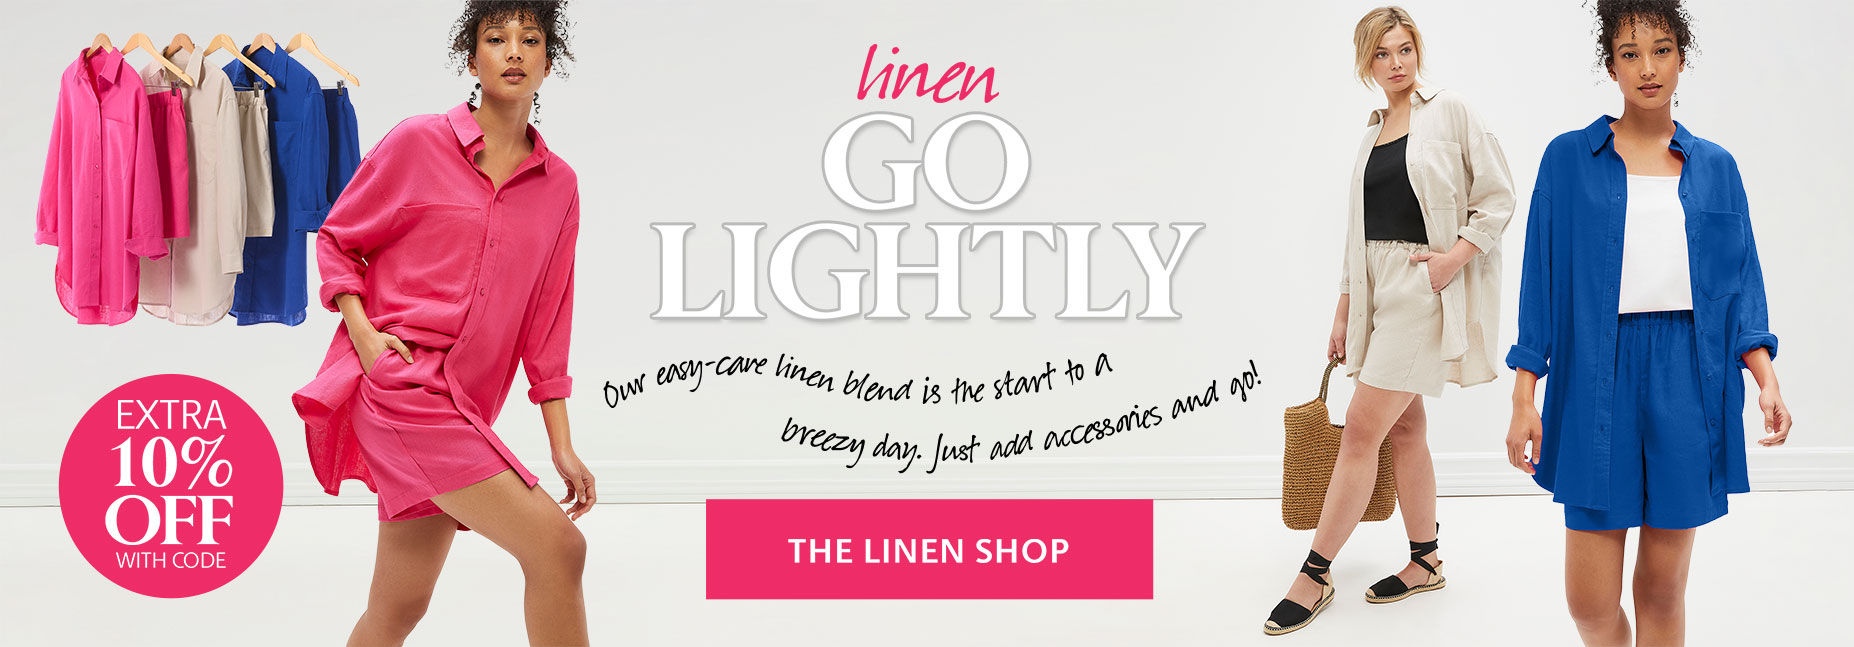 Shop Linen Go Lightly - Extra 10% Off with code